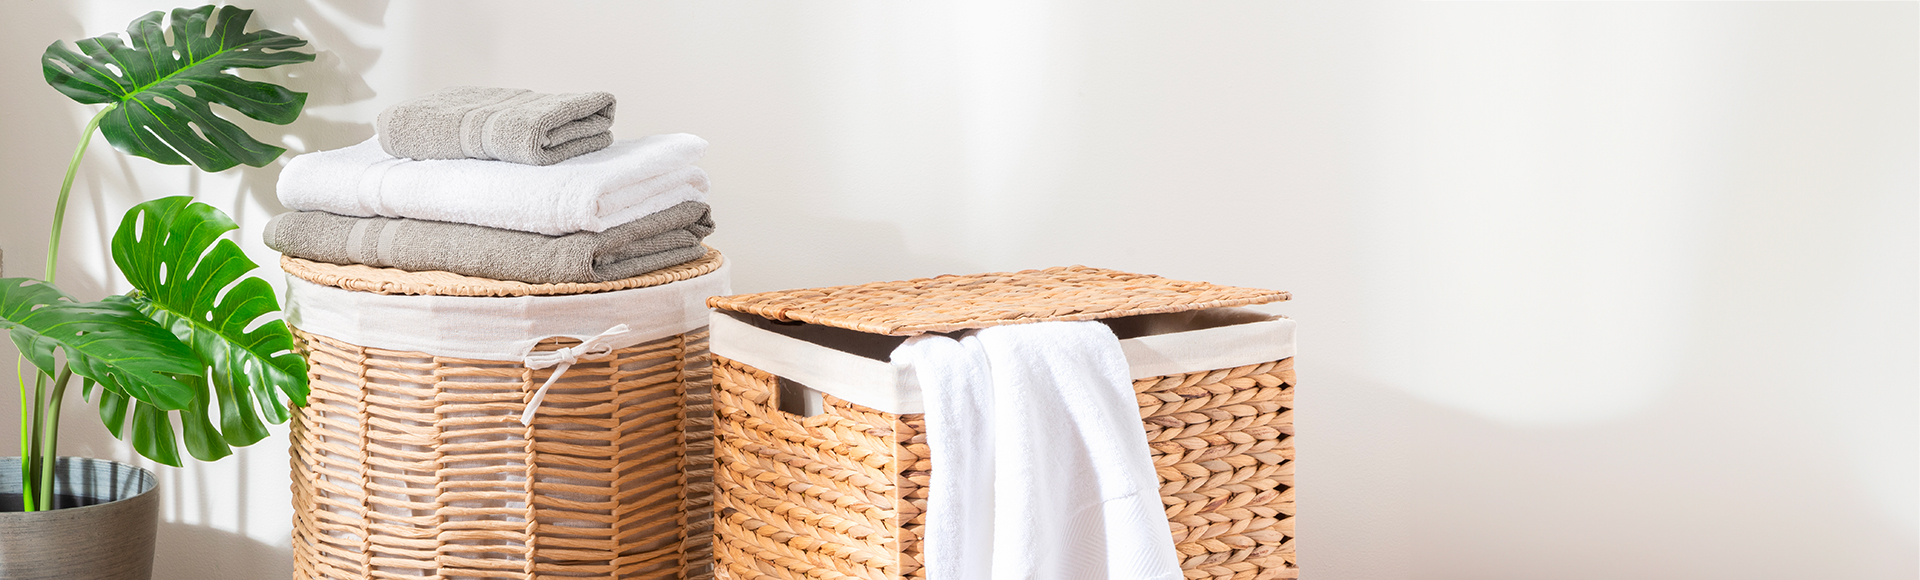 Laundry towels on a wicker laundry basket with a monstera plant